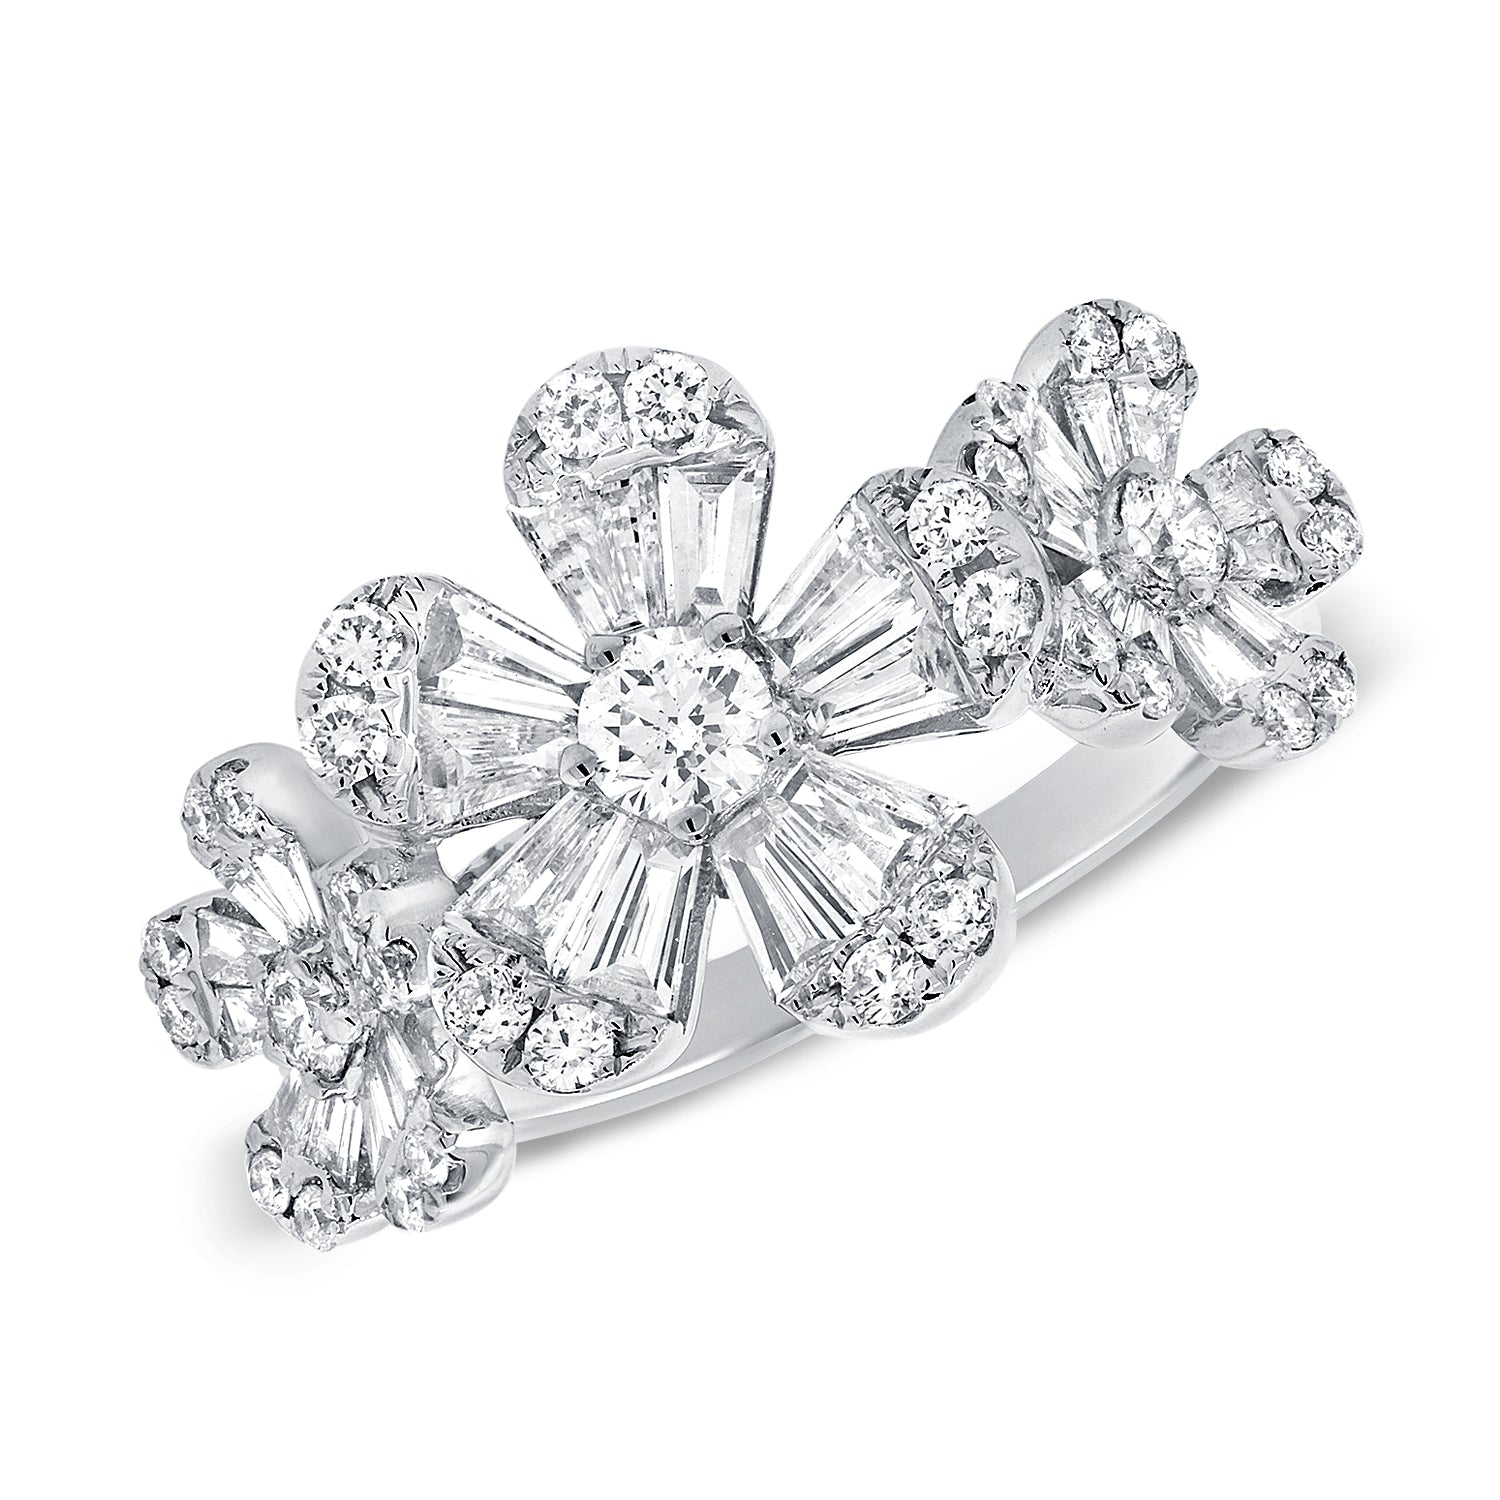 Gold, White Gold and Diamond B Blossom Ring